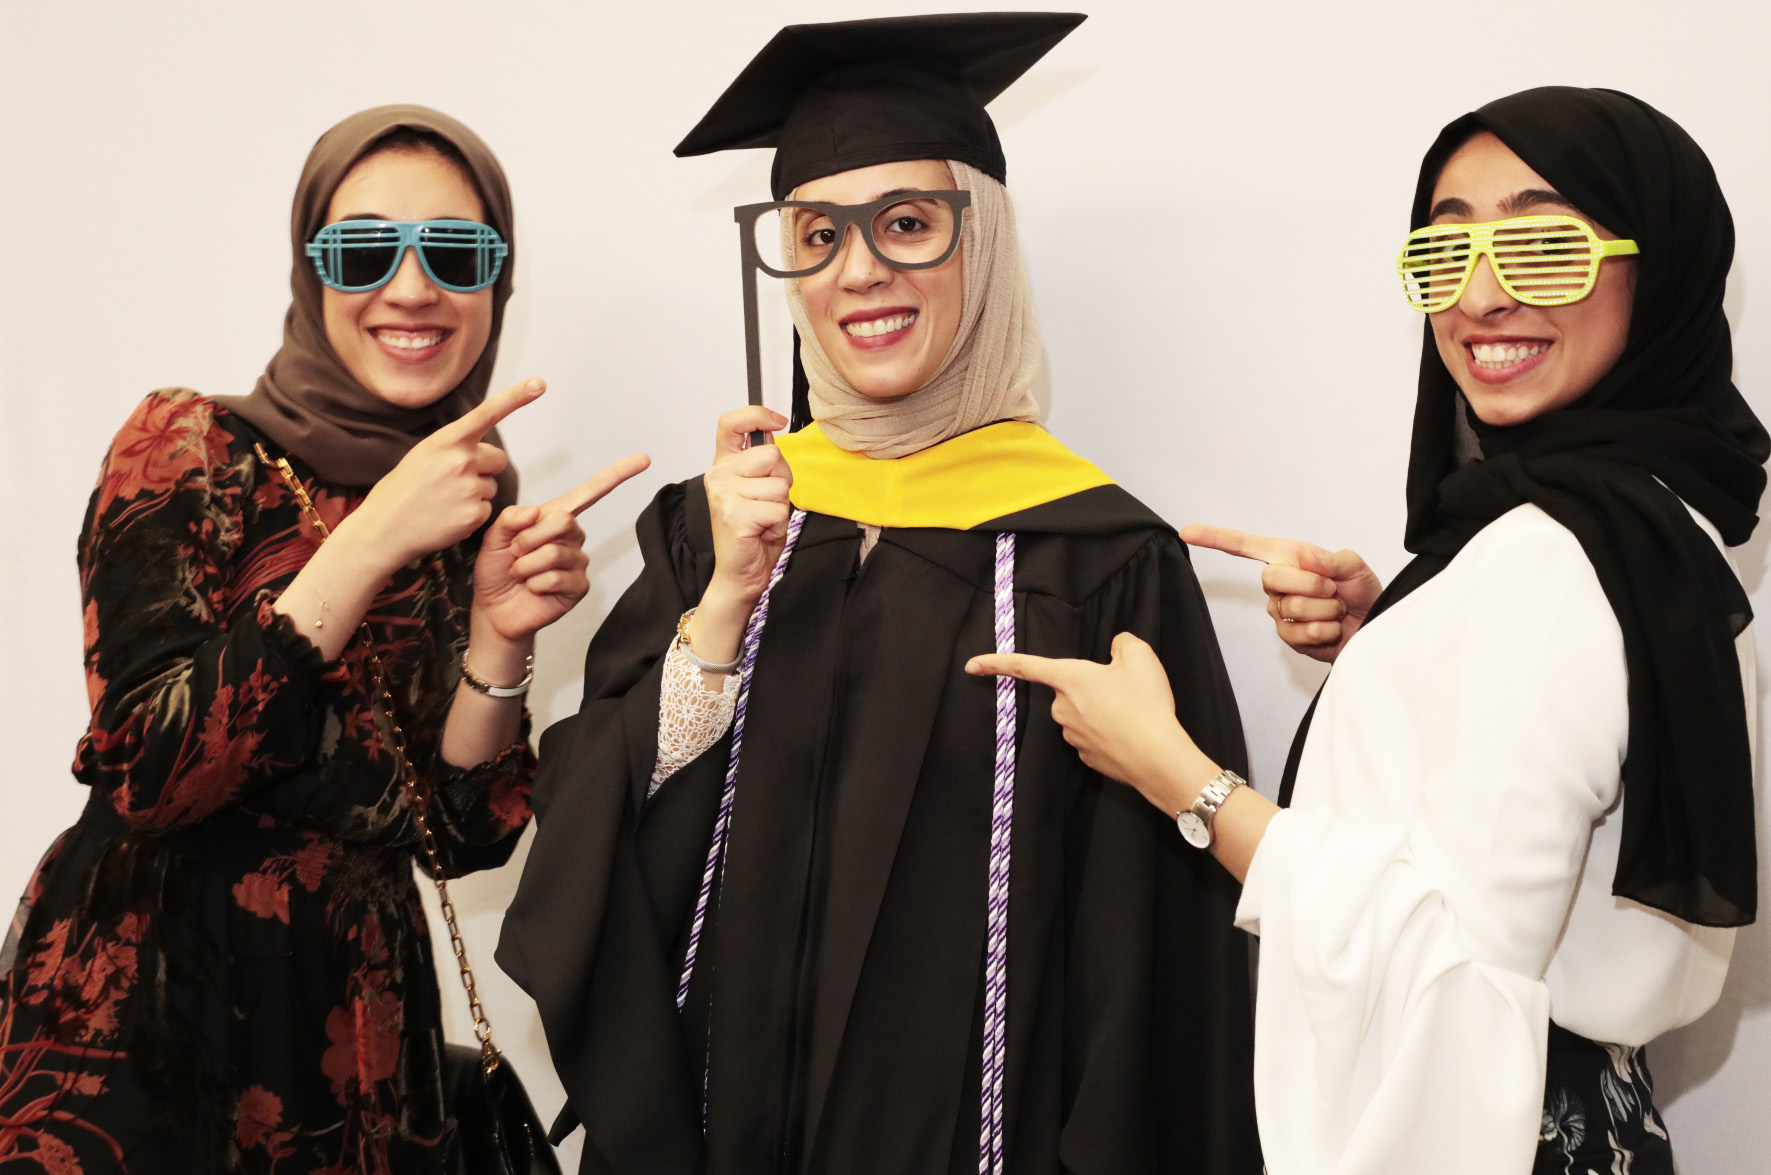 Dooah Almarzoog (center), who was celebrating her Master’s in Community Public Health from the School of Nursing, said she loved the photo booth at the Party in the Park.